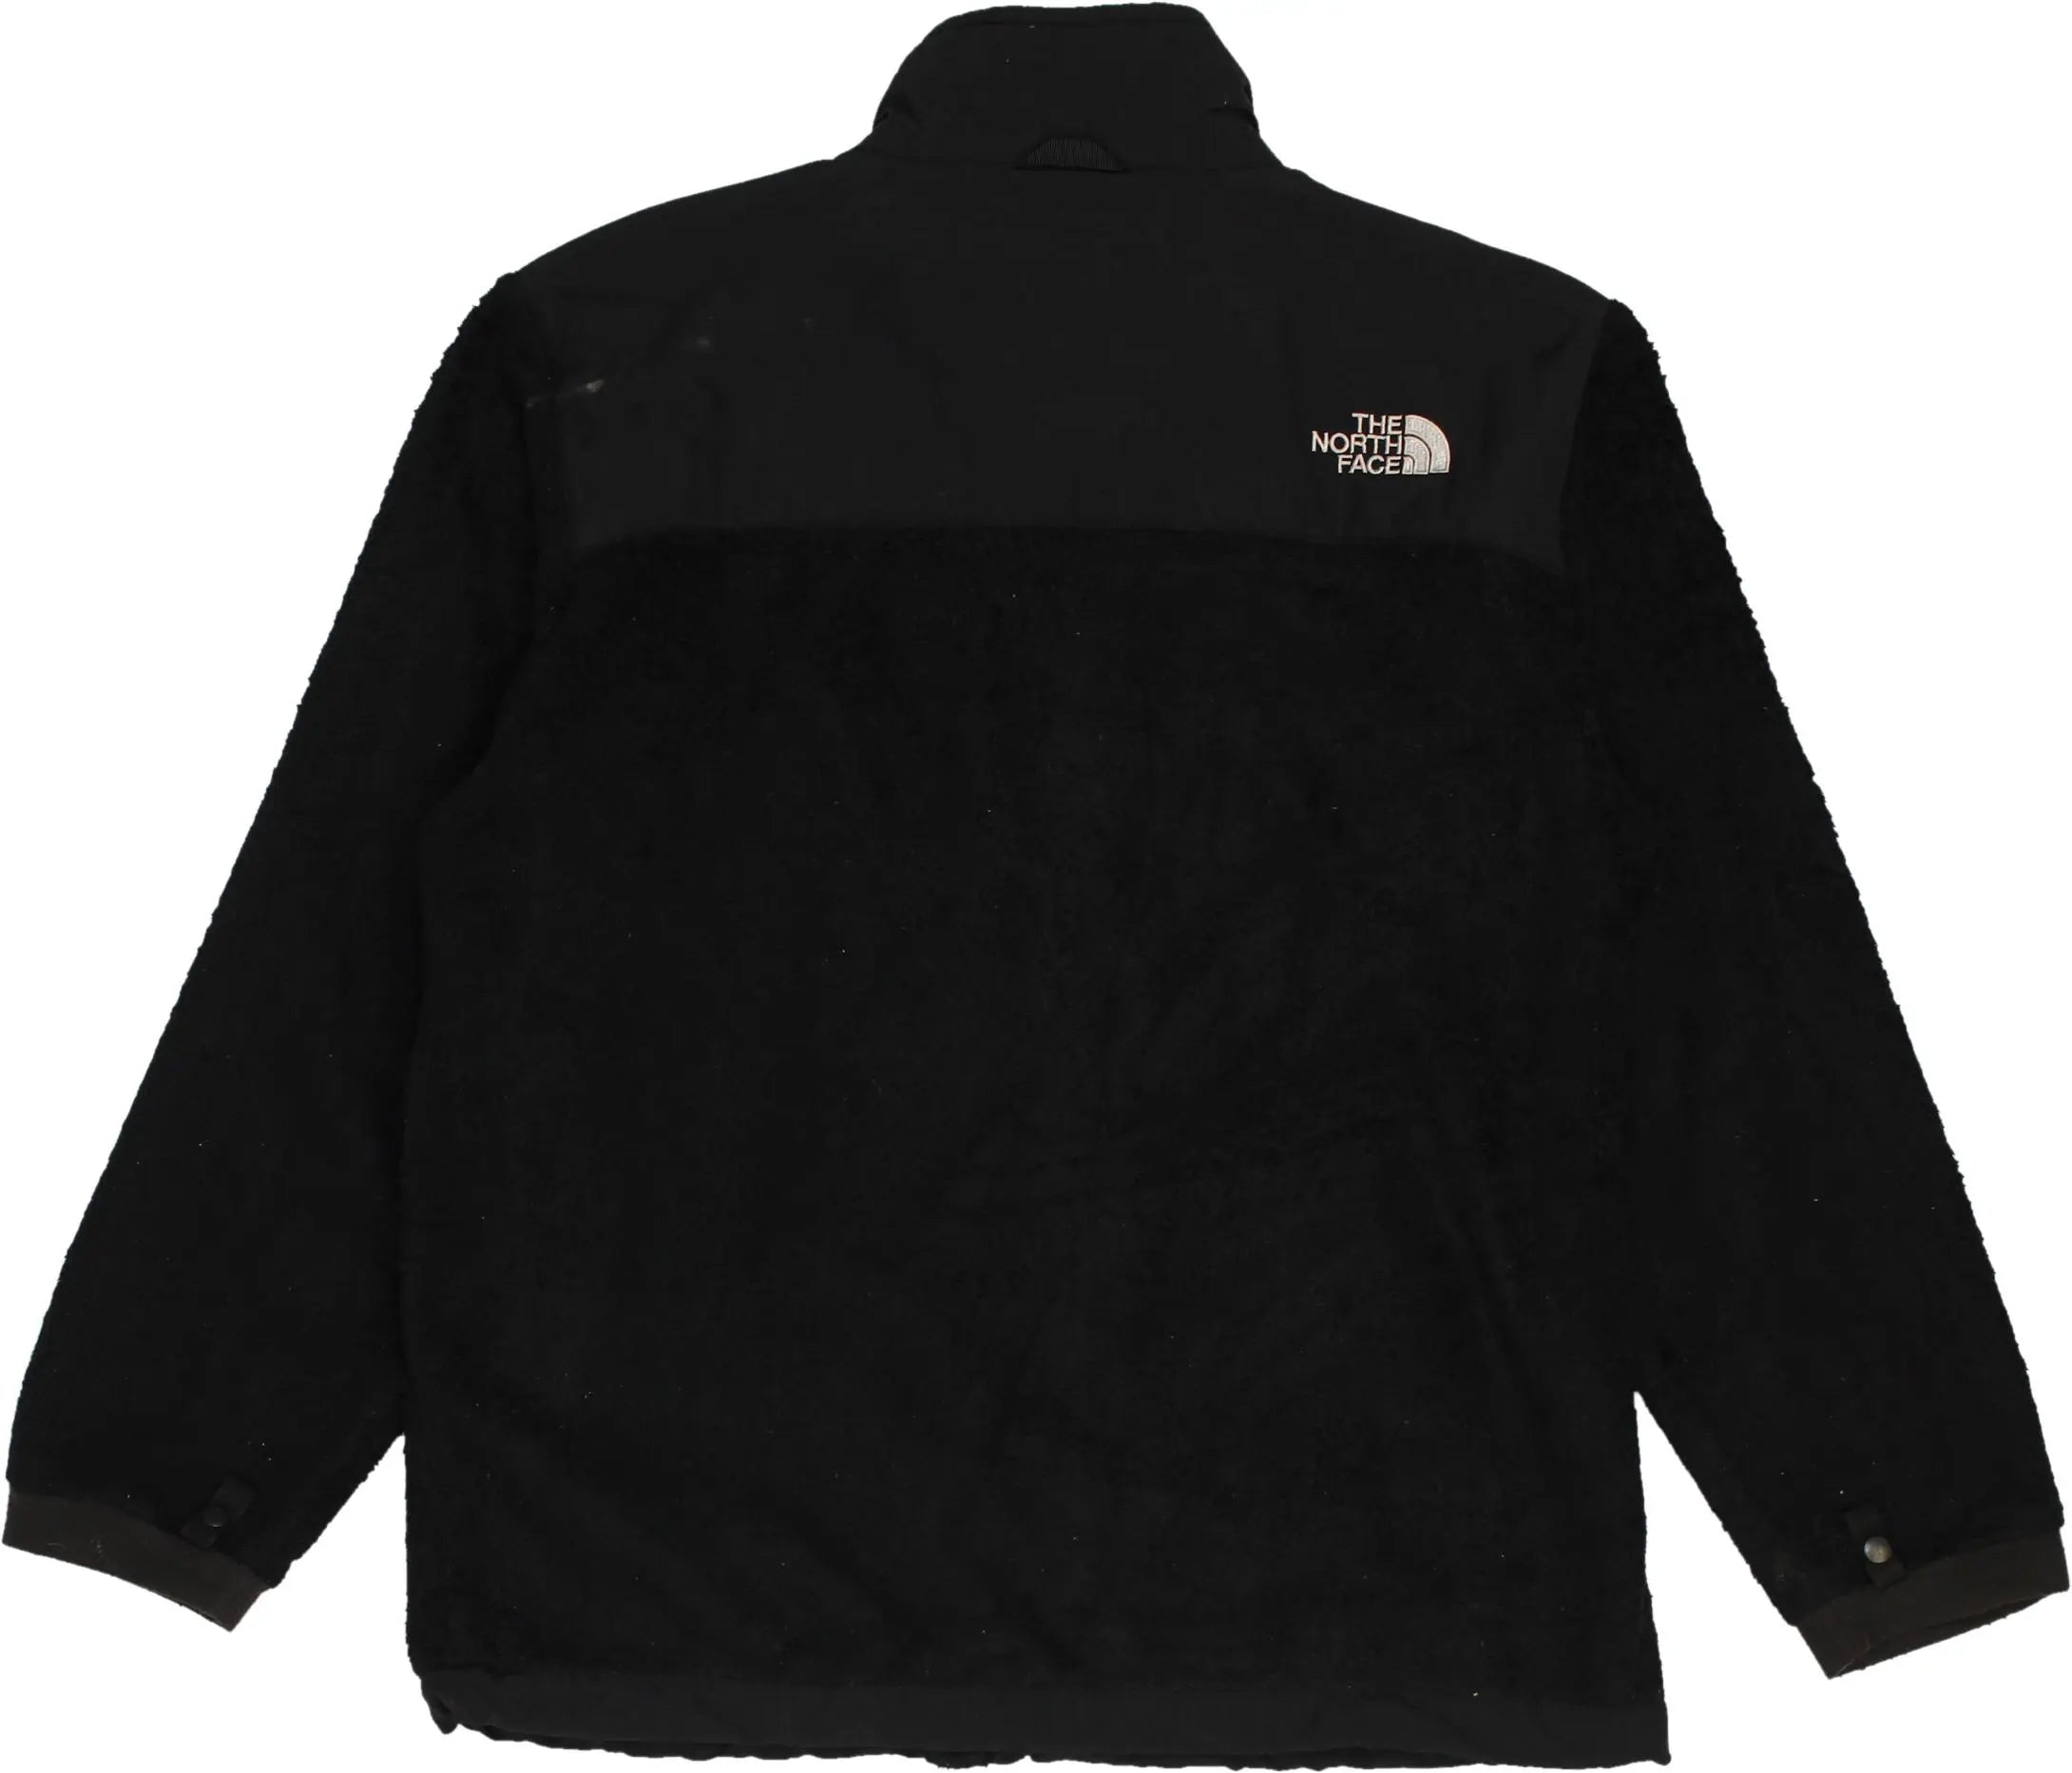 The North Face - Jacket by The North Face- ThriftTale.com - Vintage and second handclothing